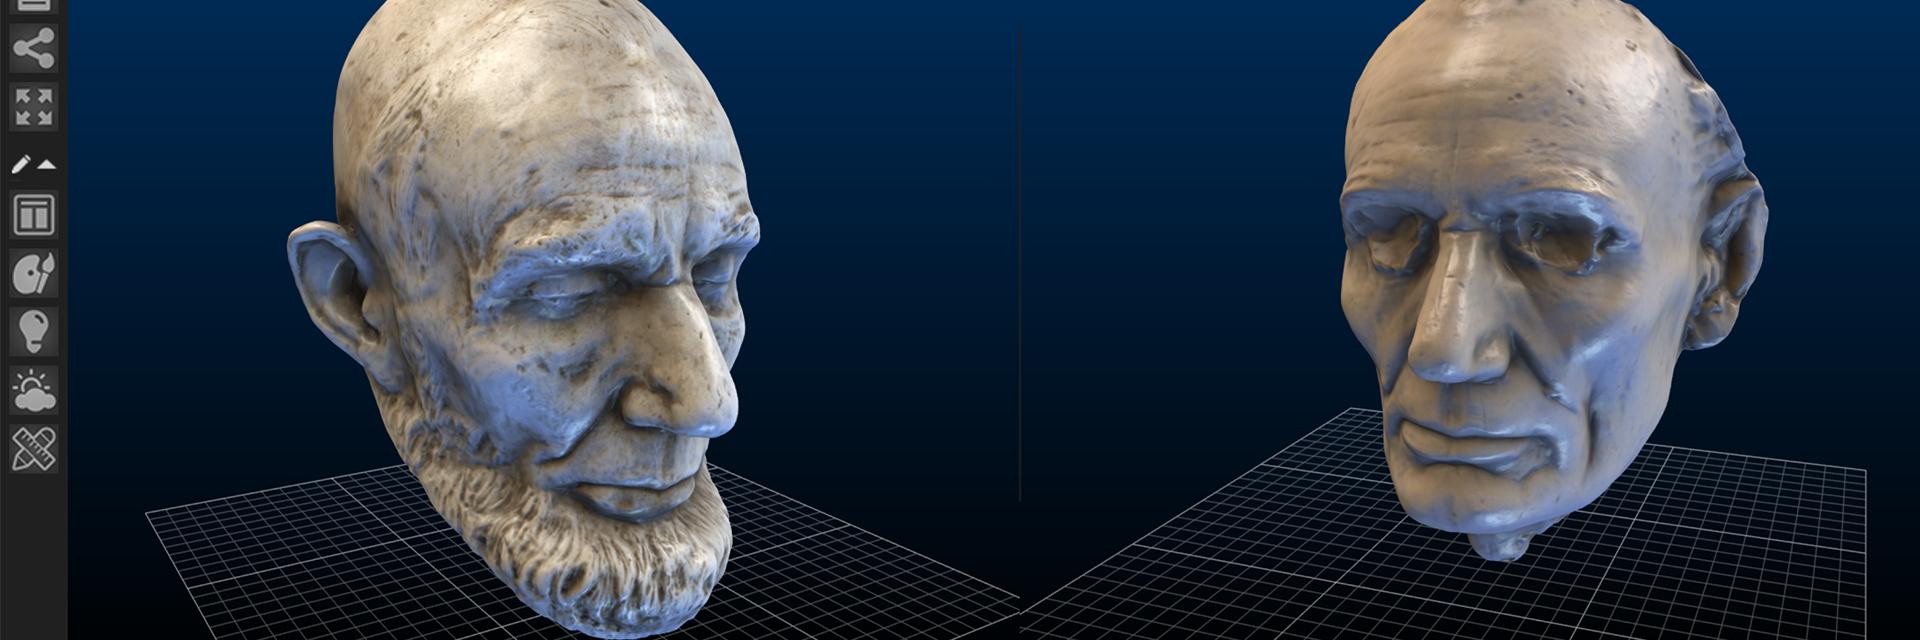 3D model of Lincoln life mask in the 3D Explorer